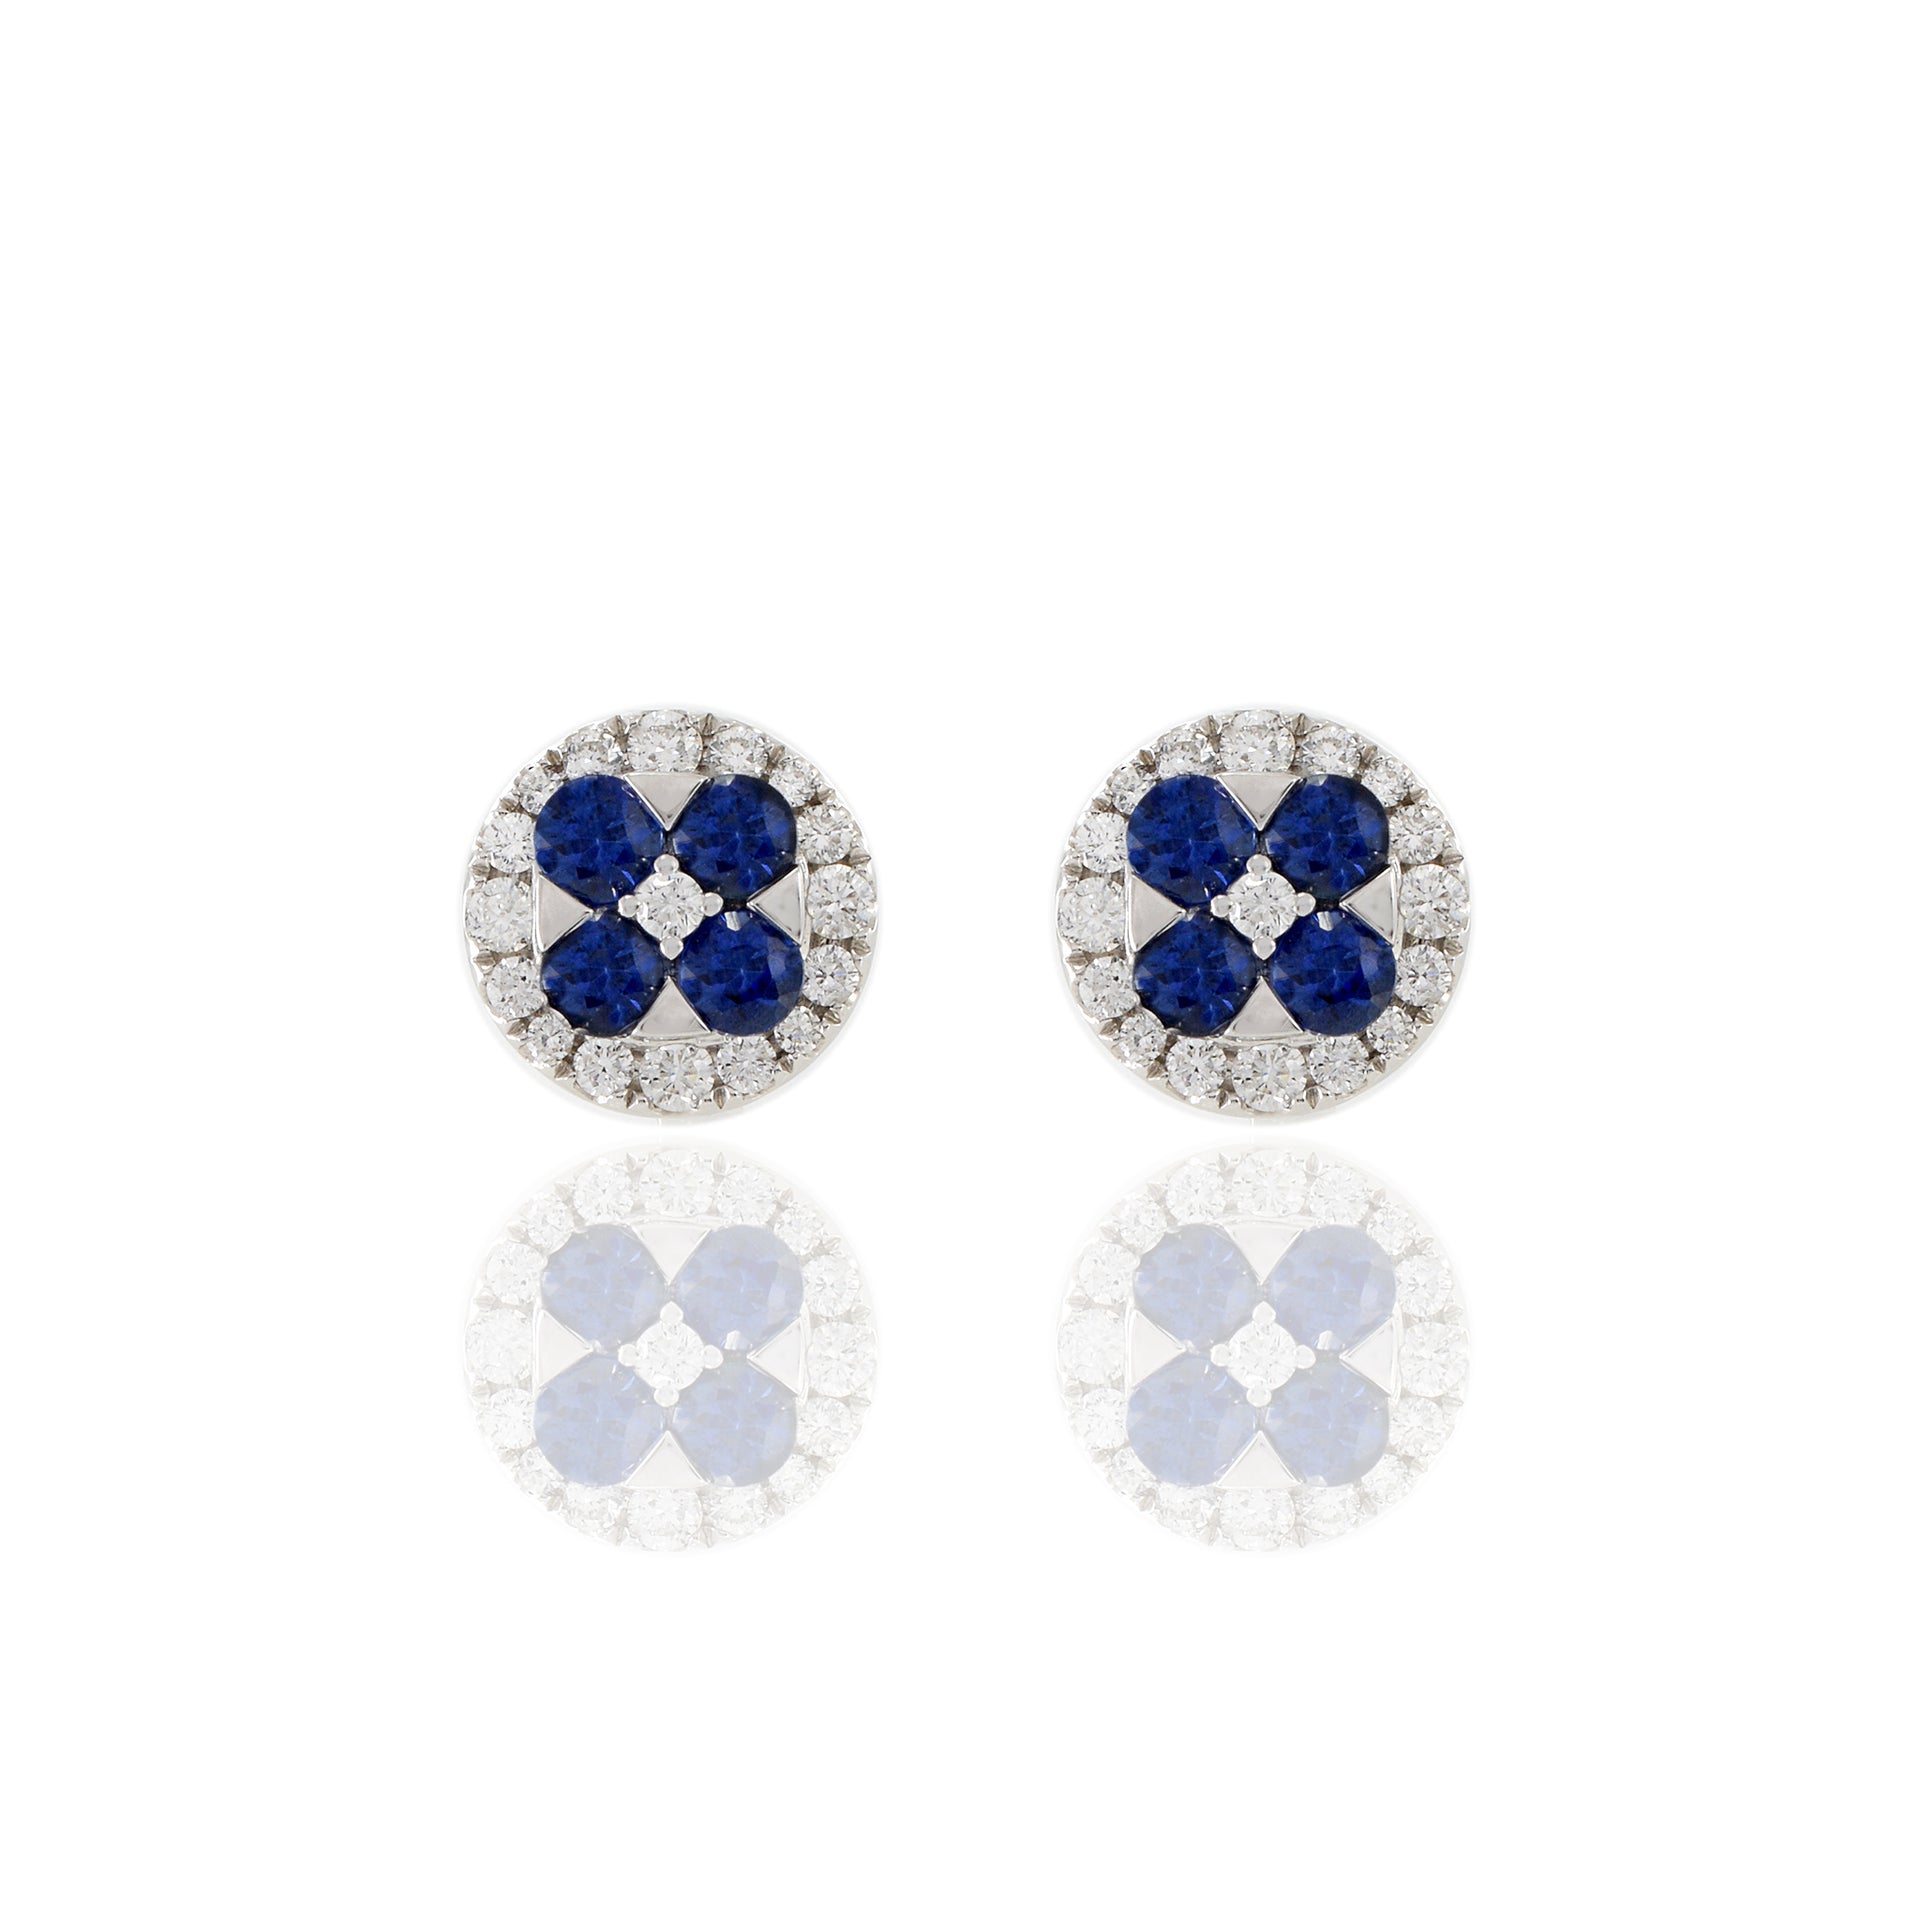 18KT White Gold Blue Sapphire And Diamond Earrings